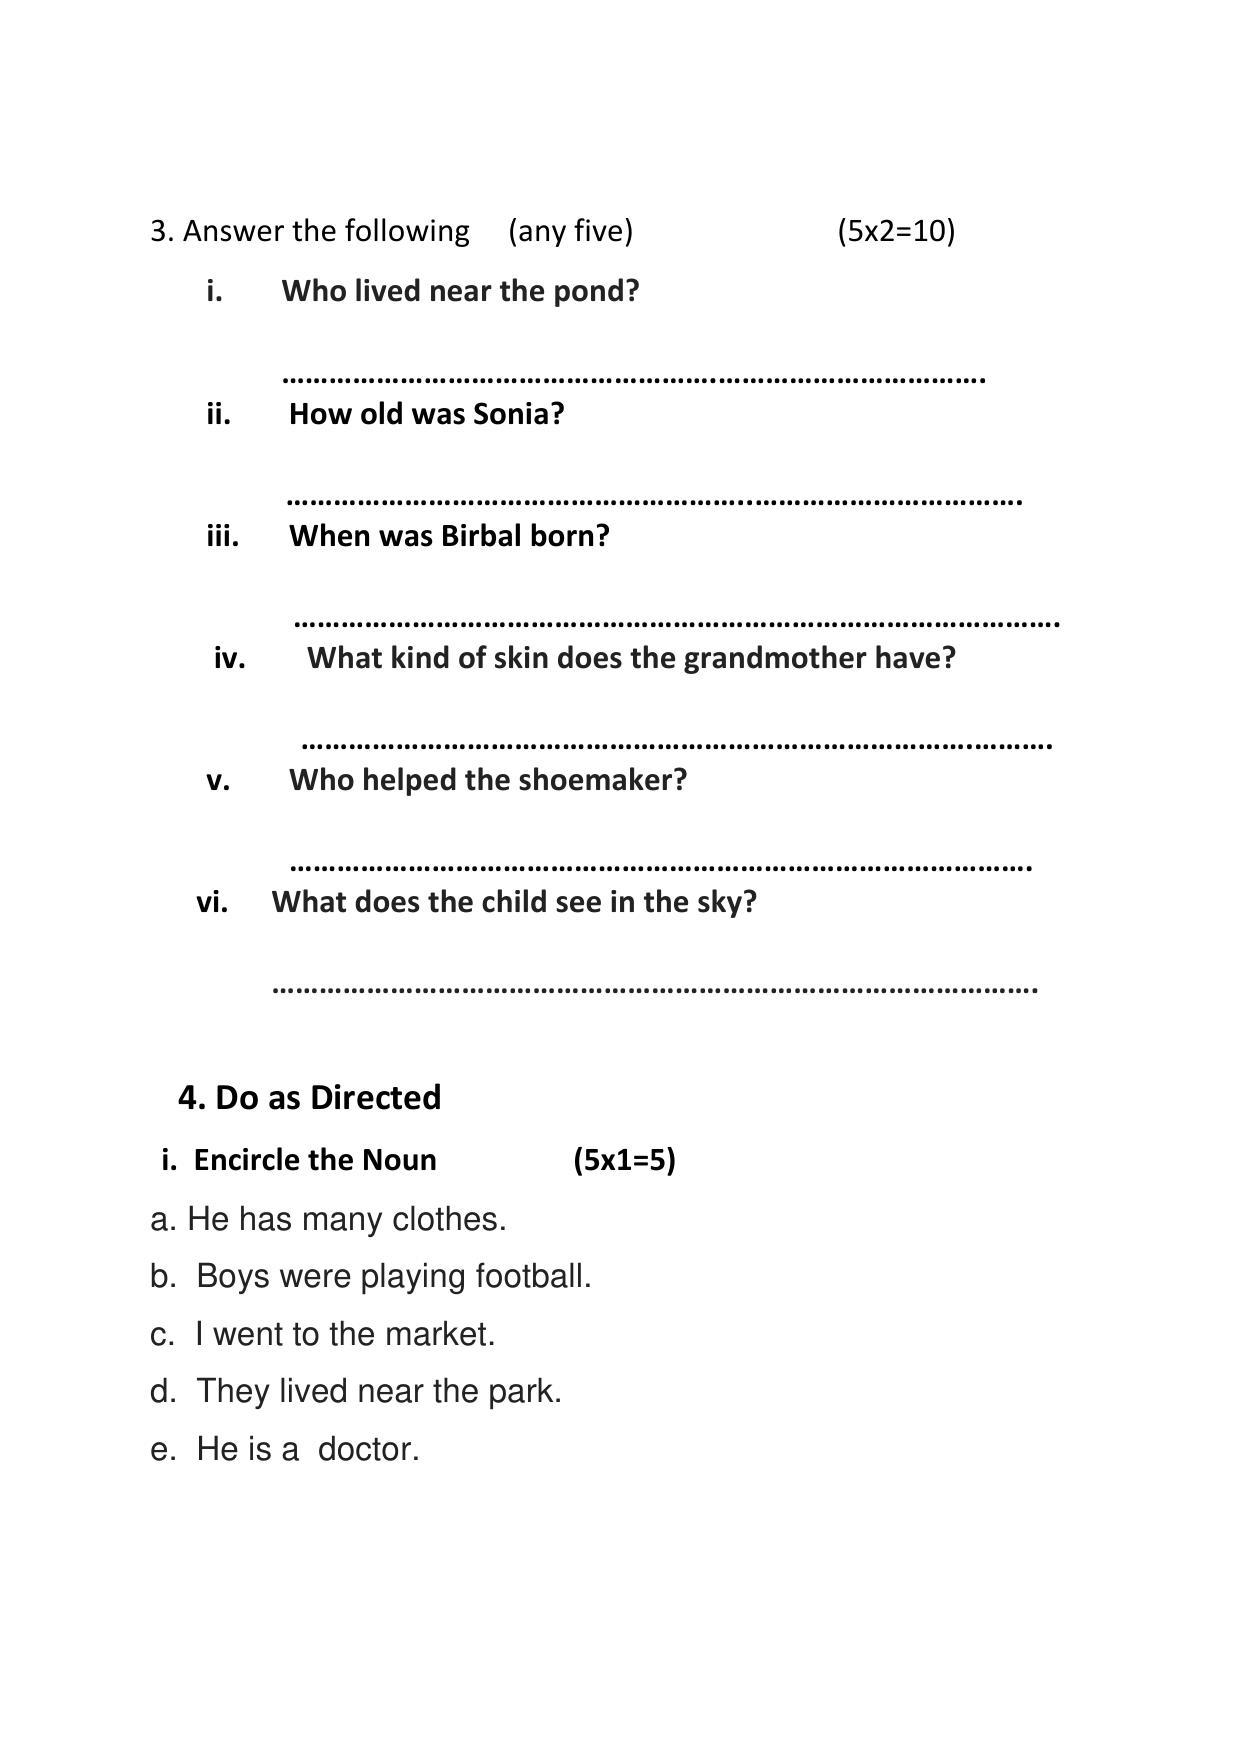 PSEB Class 5 English (DA Students) Model Papers - Page 2